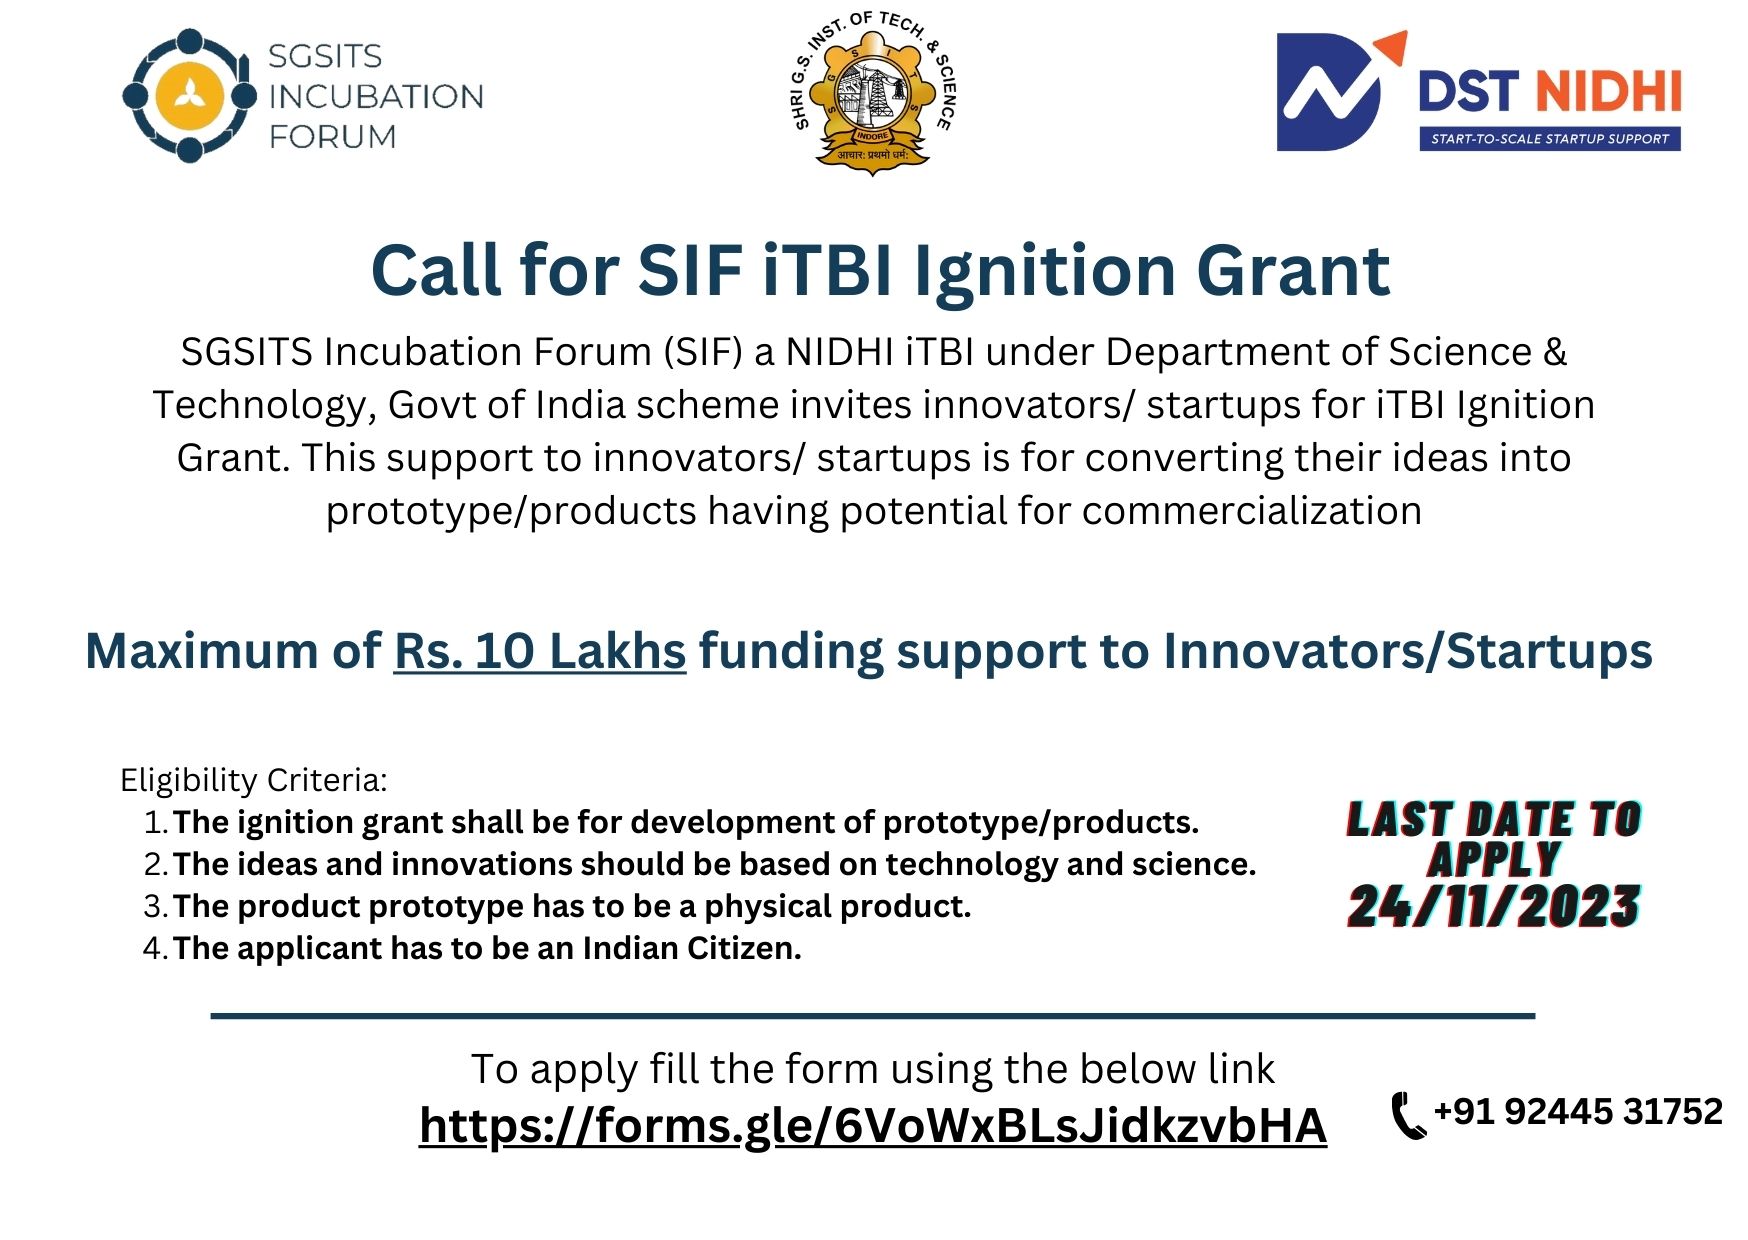 SIF iTBI Ignition Grant